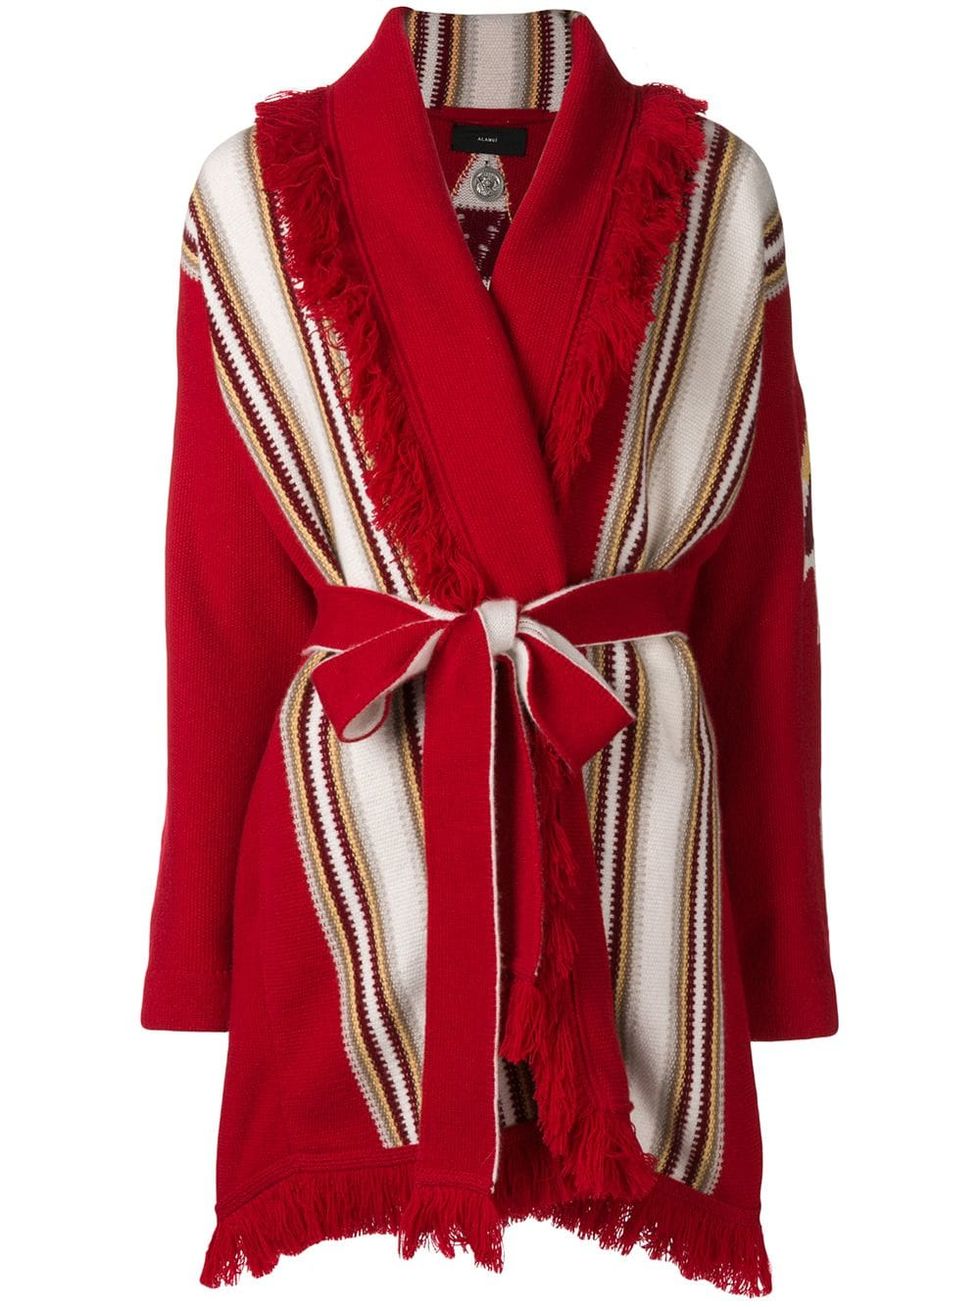 Clothing, Red, Maroon, Robe, Outerwear, Wrap, Costume, Scarf, Fashion accessory, Shawl, 